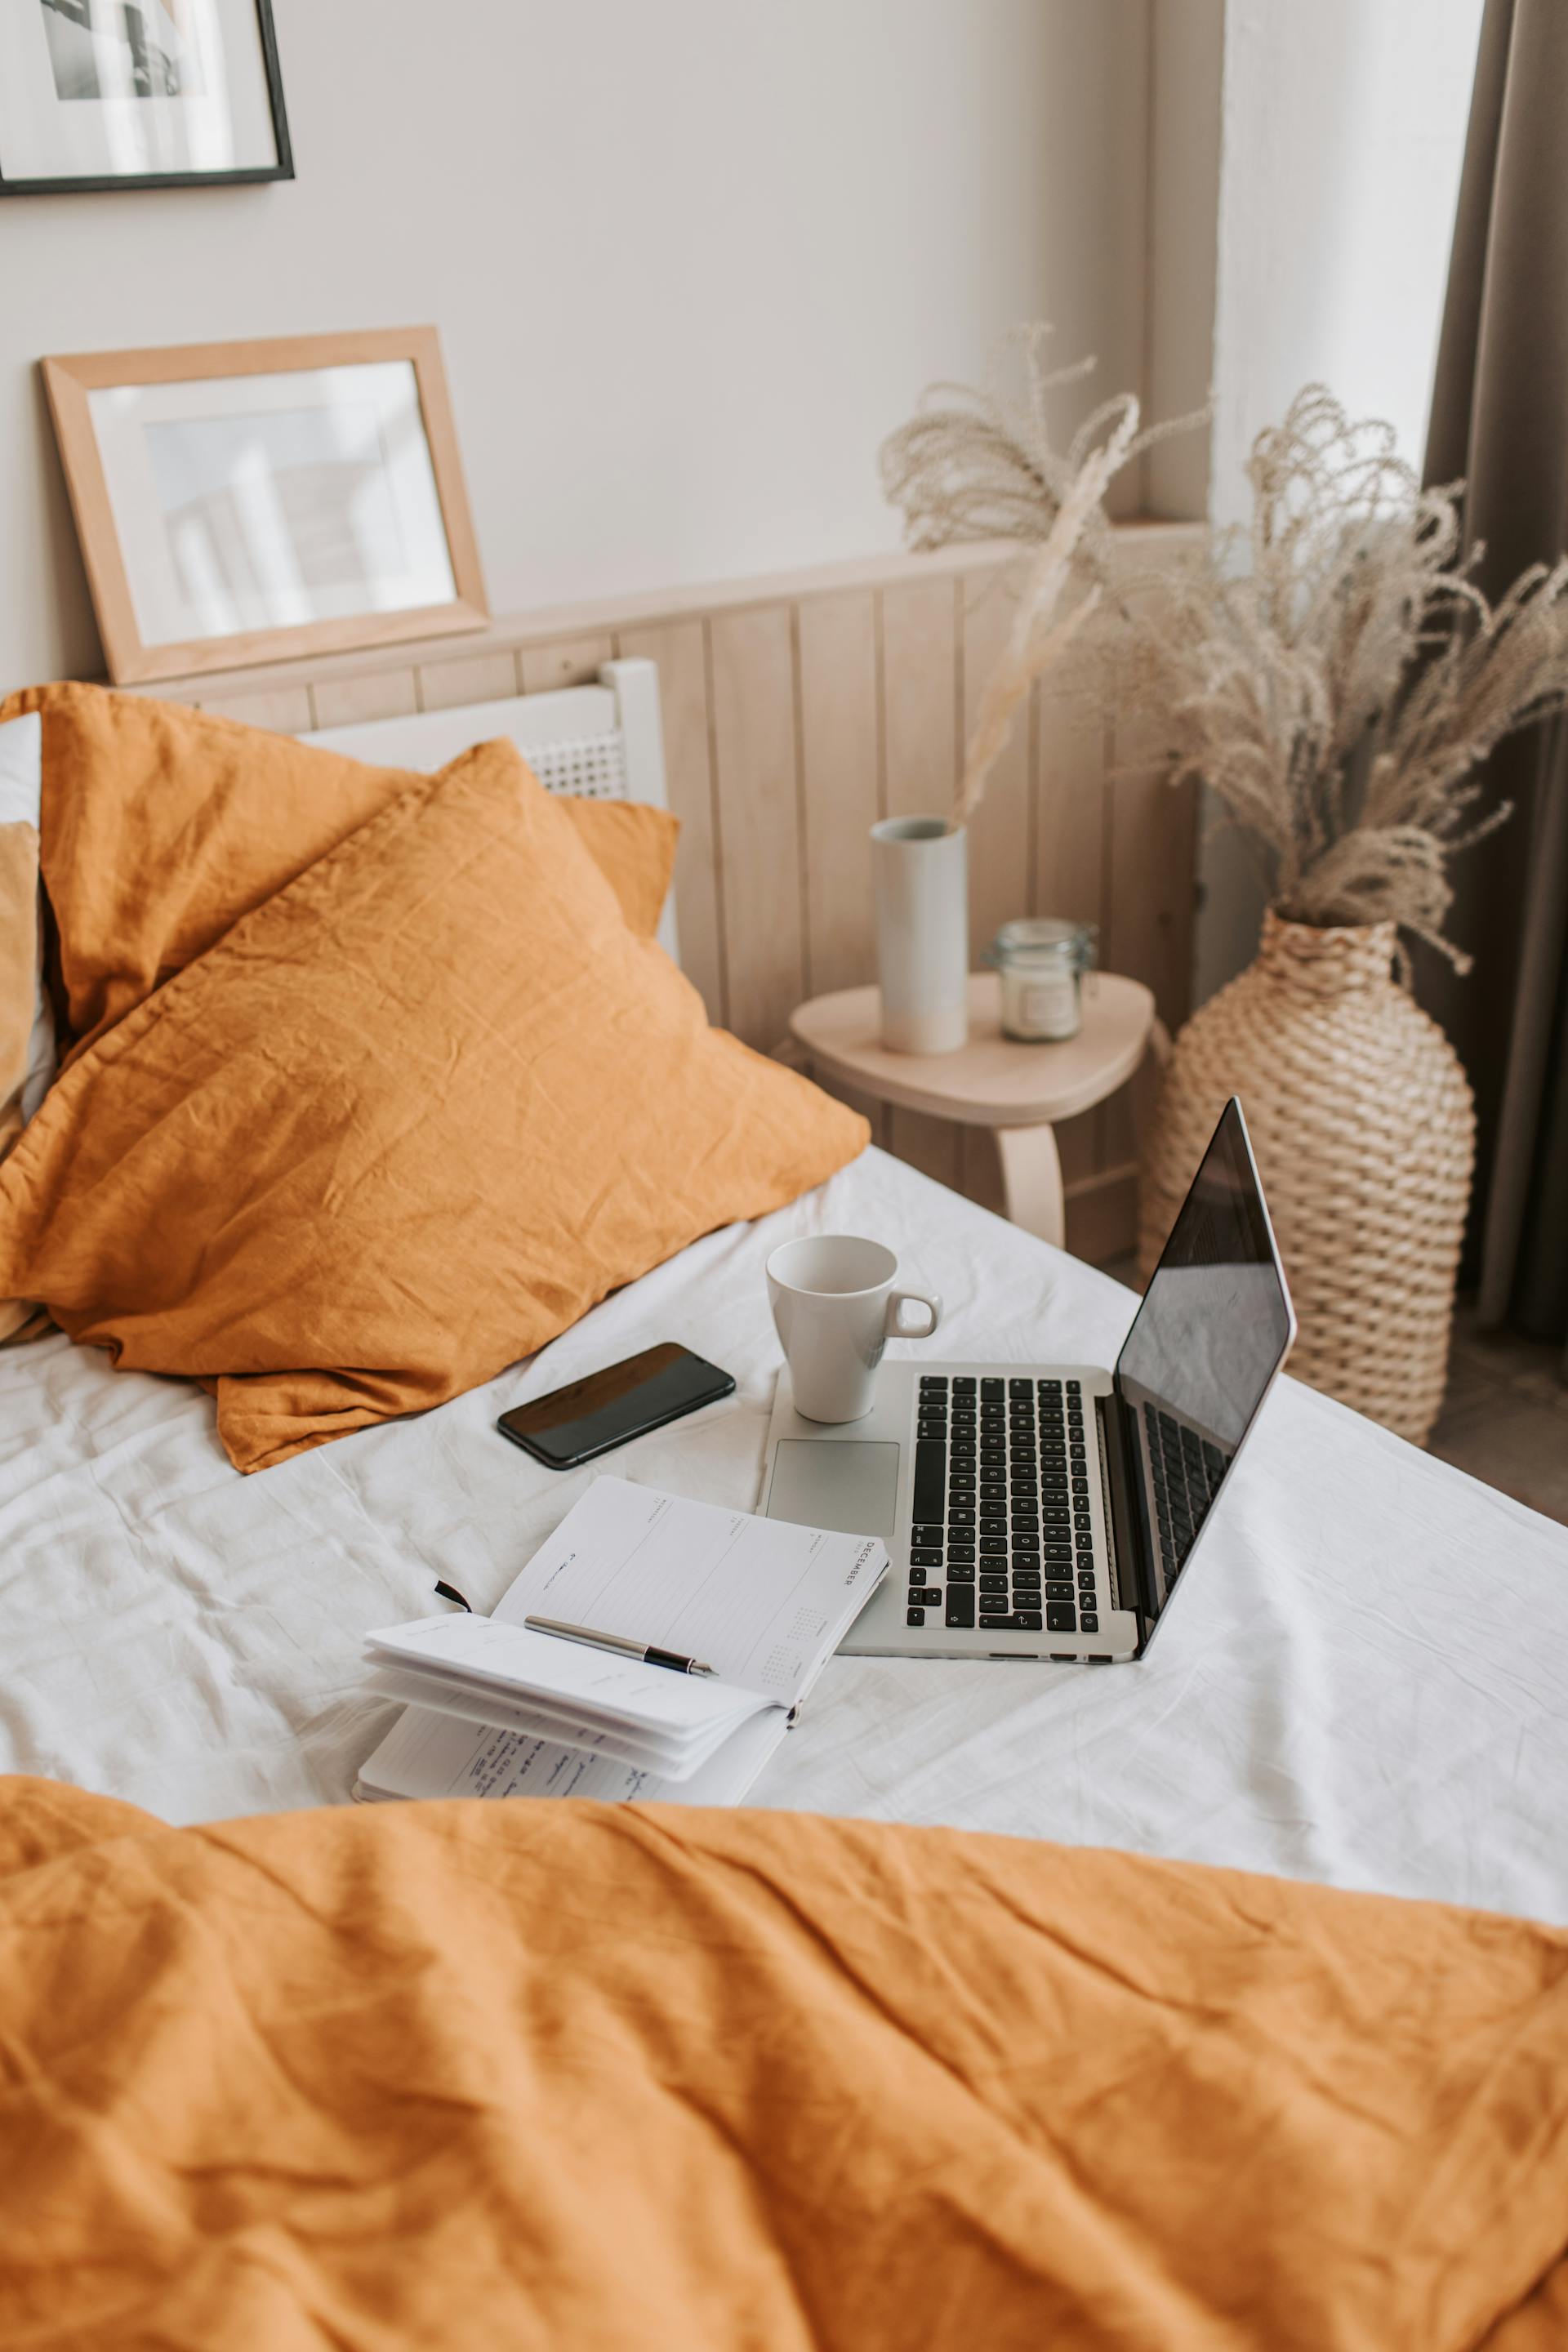 A cup of coffee and a laptop on a bed | Source: Pexels